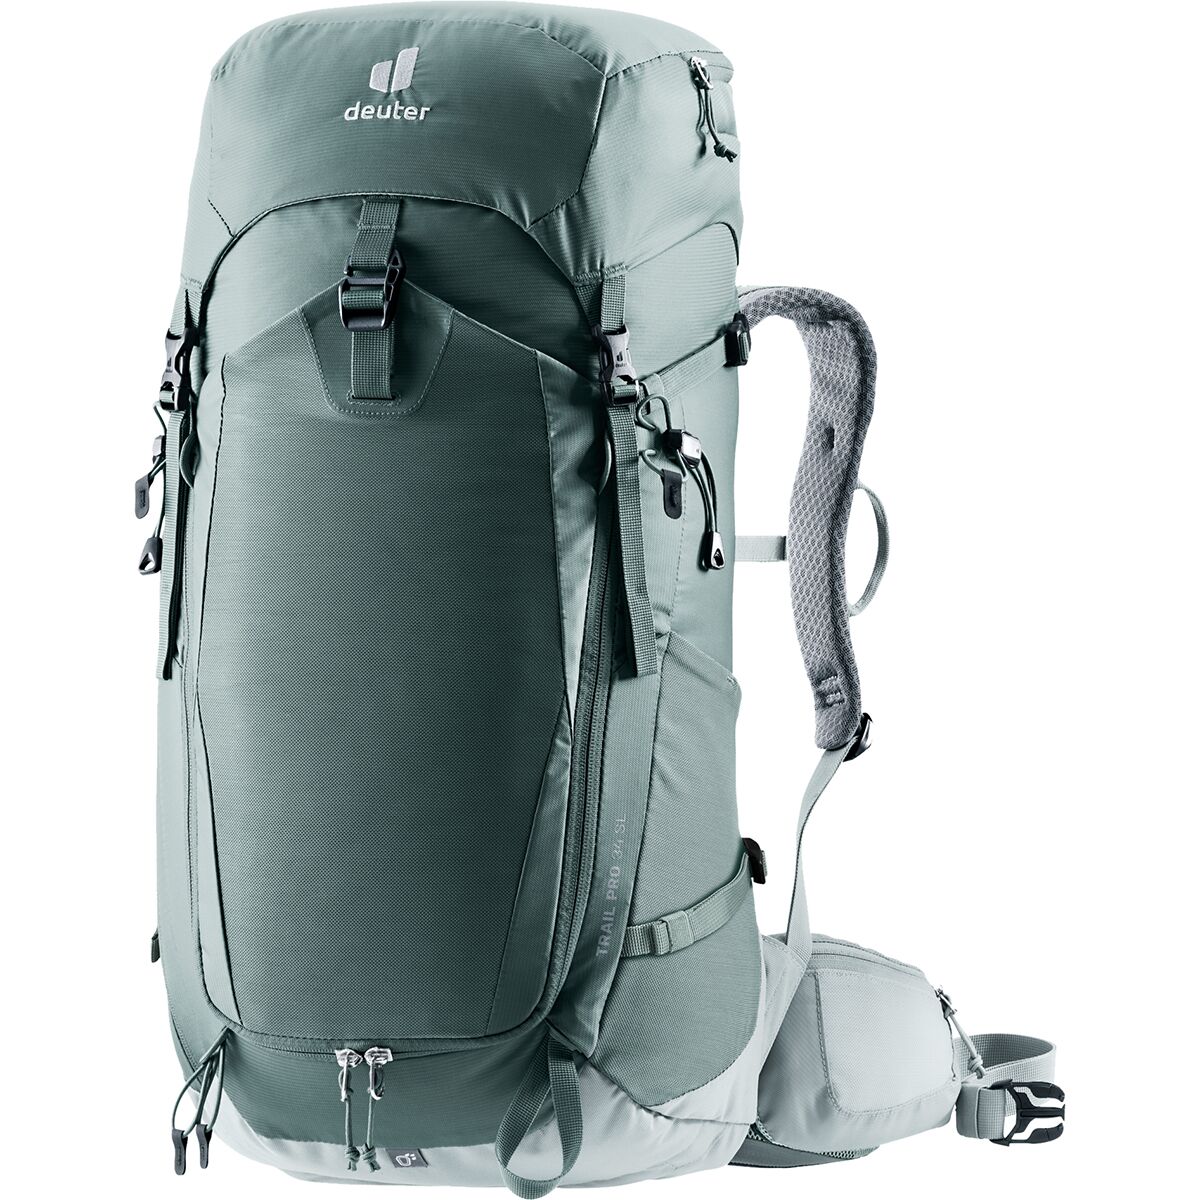 Patch Drank Aap Deuter Trail Pro SL 34L Backpack - Women's - Hike & Camp